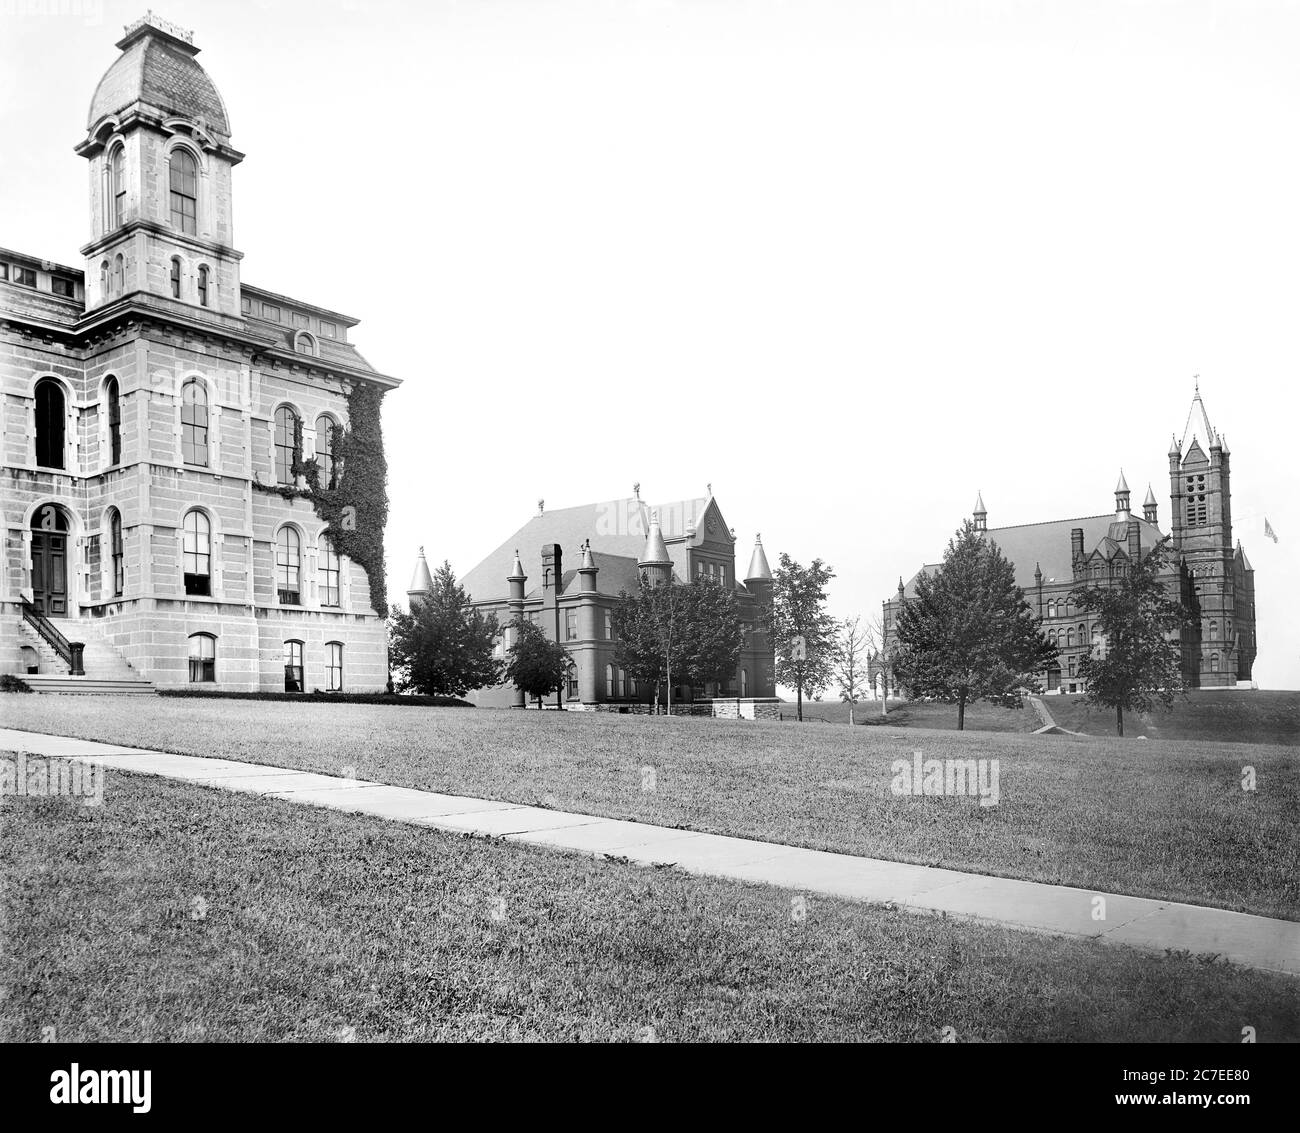 Campus Buildings, Crouse Memorial College in background, Syracuse University, Syracuse, New York, USA, Detroit Publishing Company, 1900 Stock Photo